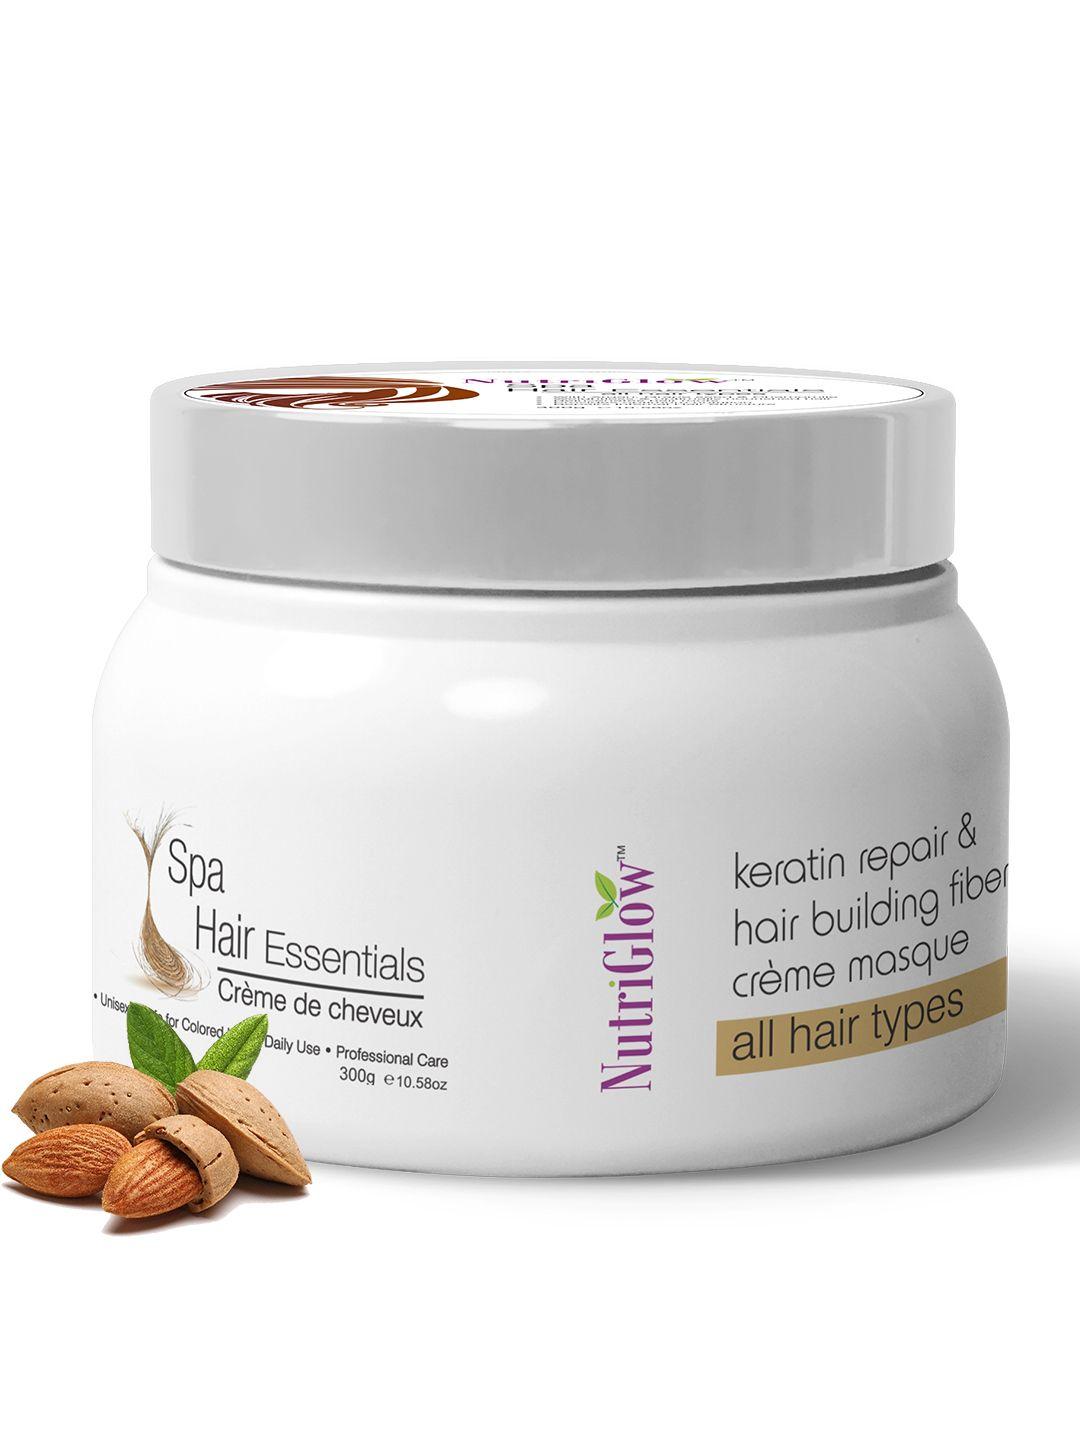 nutriglow sustainable protein rich spa hair essentials for all hair types - 300 g